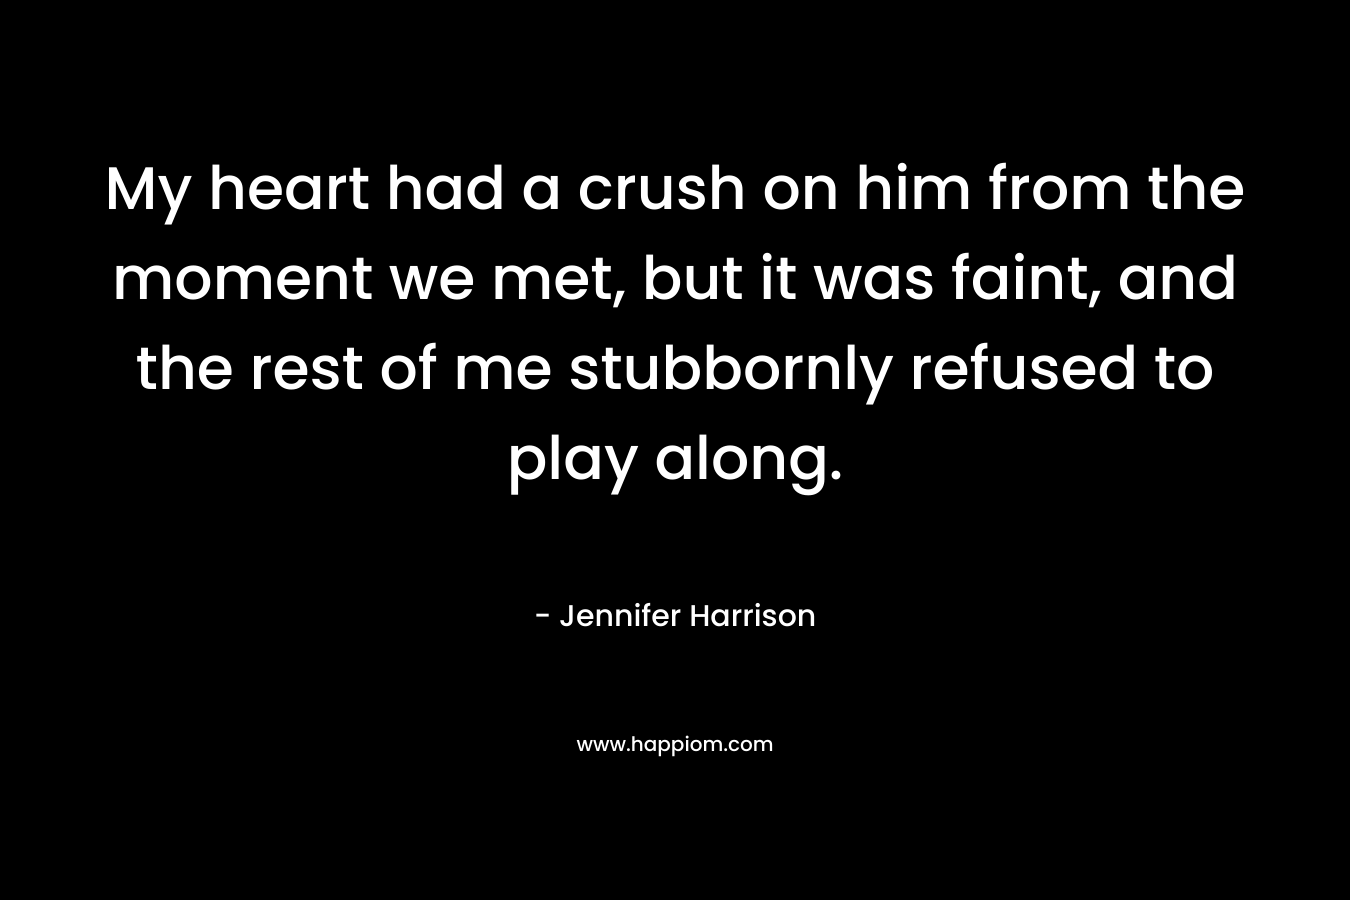 My heart had a crush on him from the moment we met, but it was faint, and the rest of me stubbornly refused to play along.